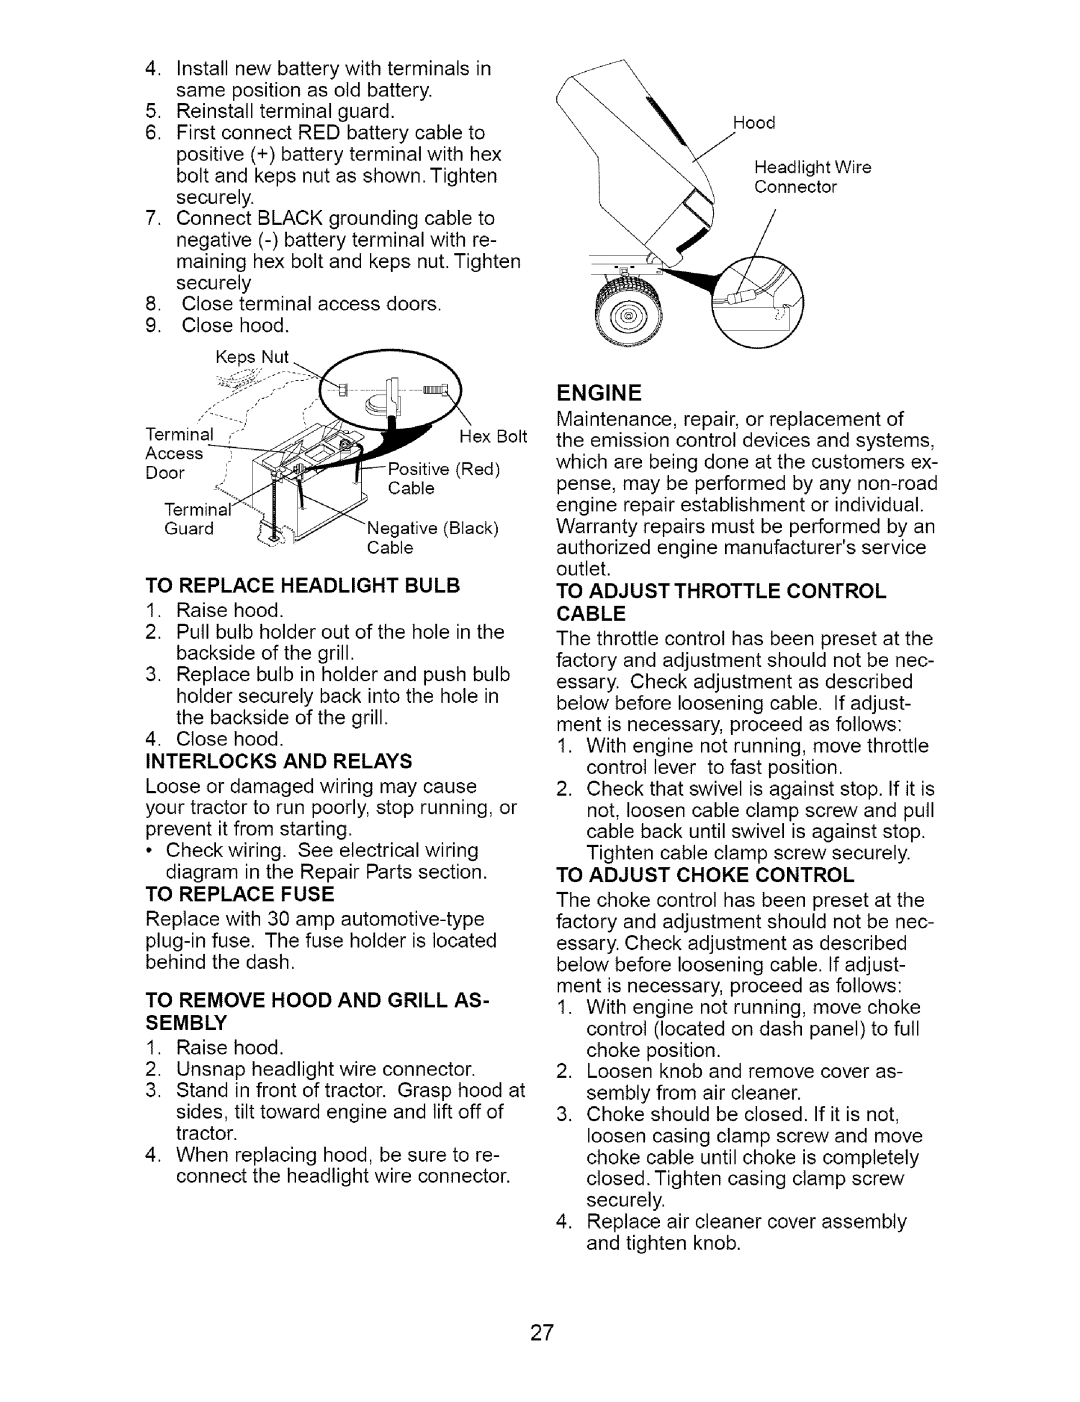 Craftsman 917.27621 manual To Replace Headlight Bulb, To Remove Hood and Grill AS- Sembly 